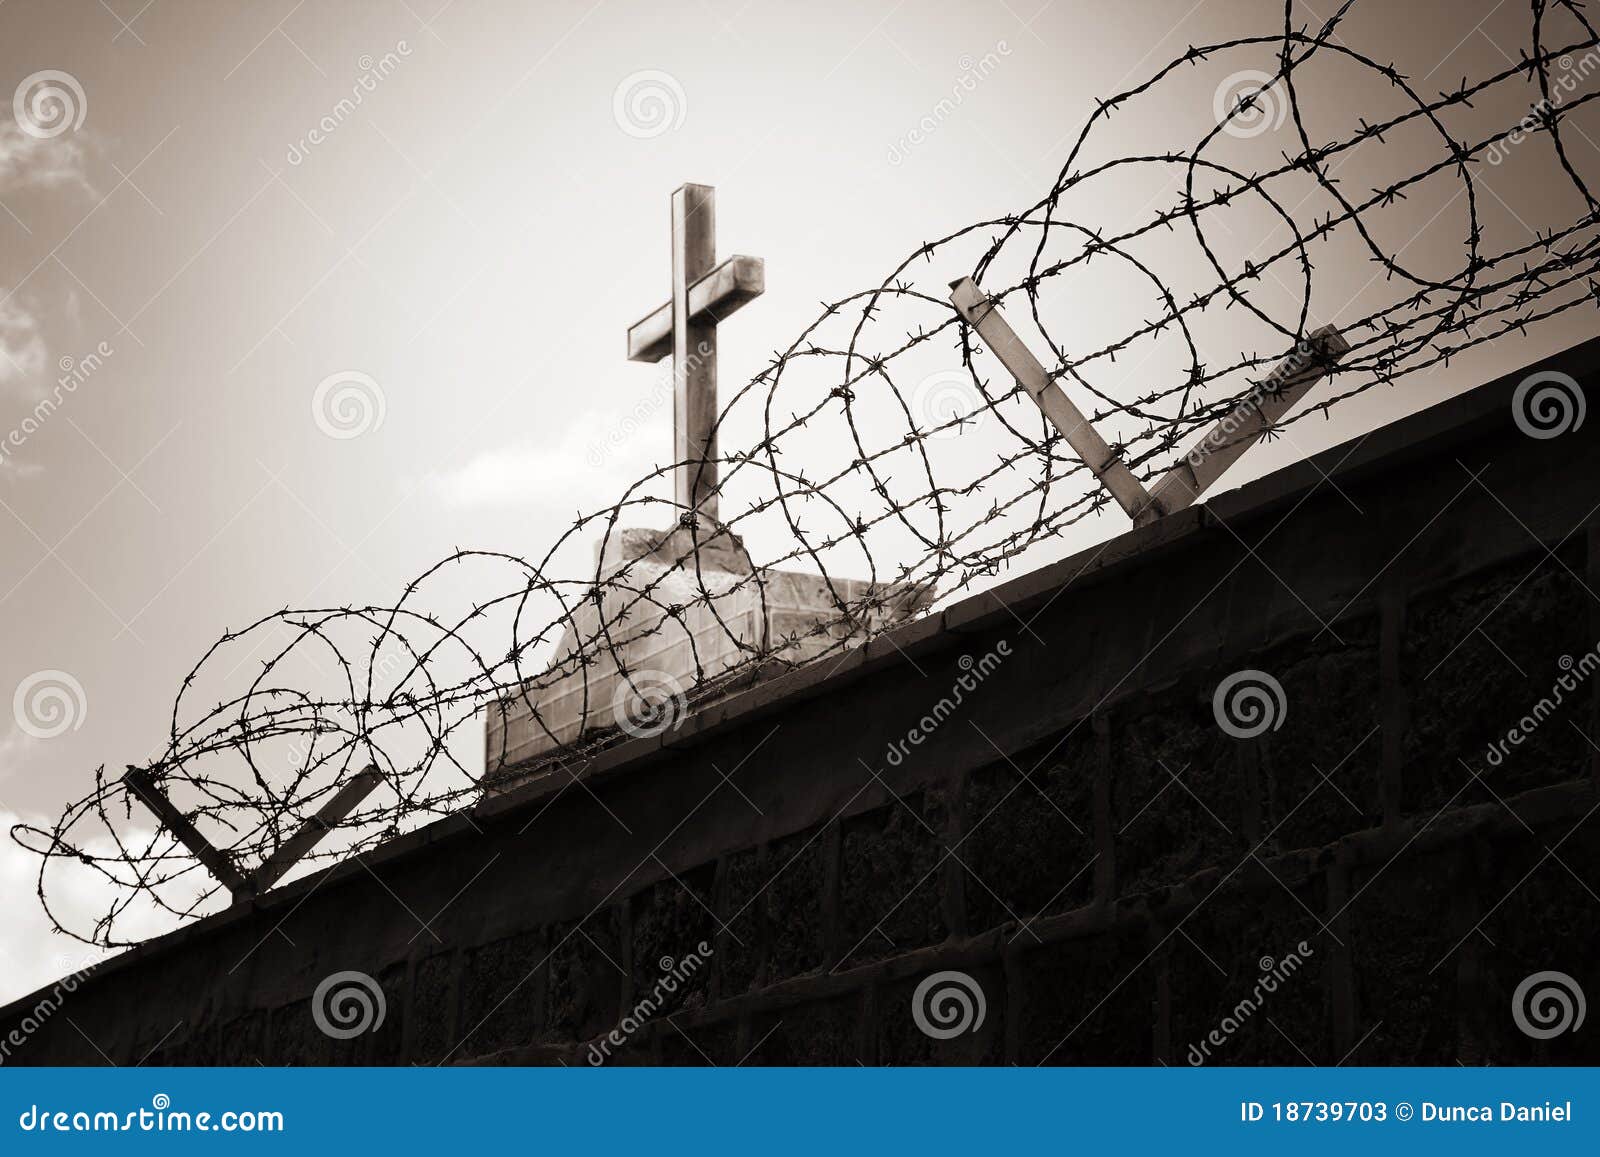 religion and war - cross behind barbed wire